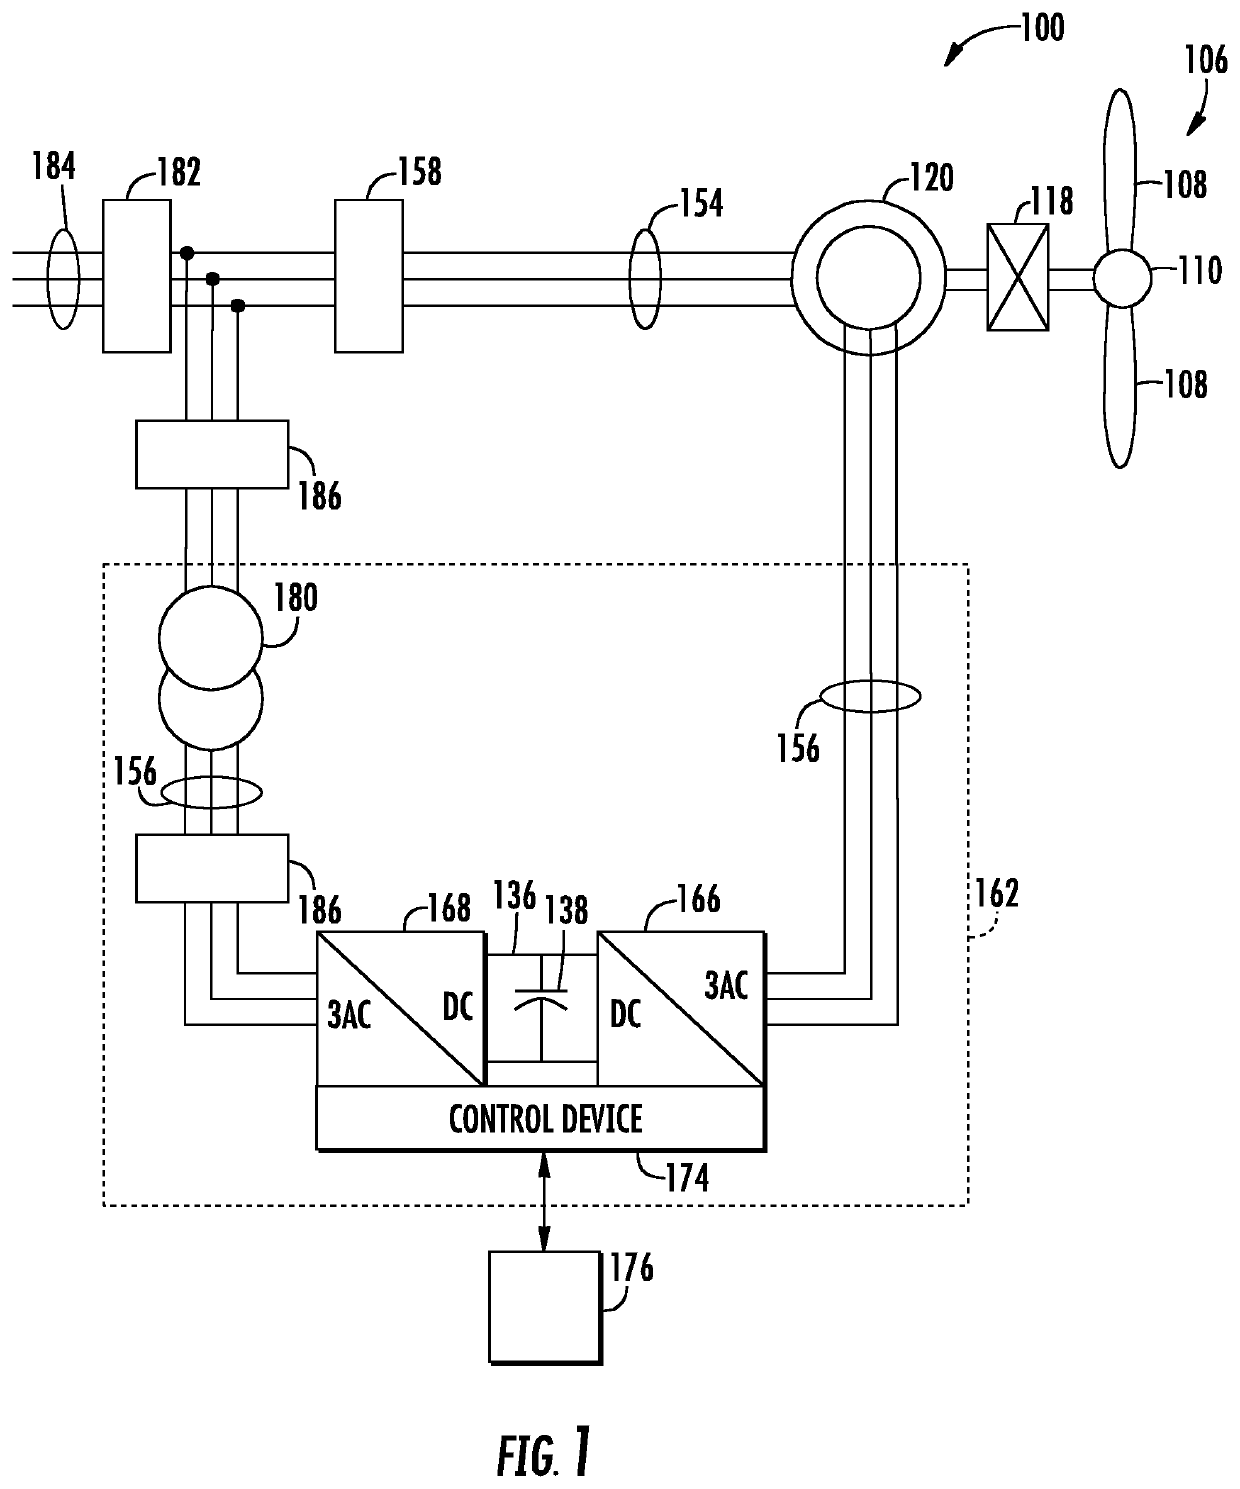 Low-wind operation of clustered doubly fed induction generator wind turbines